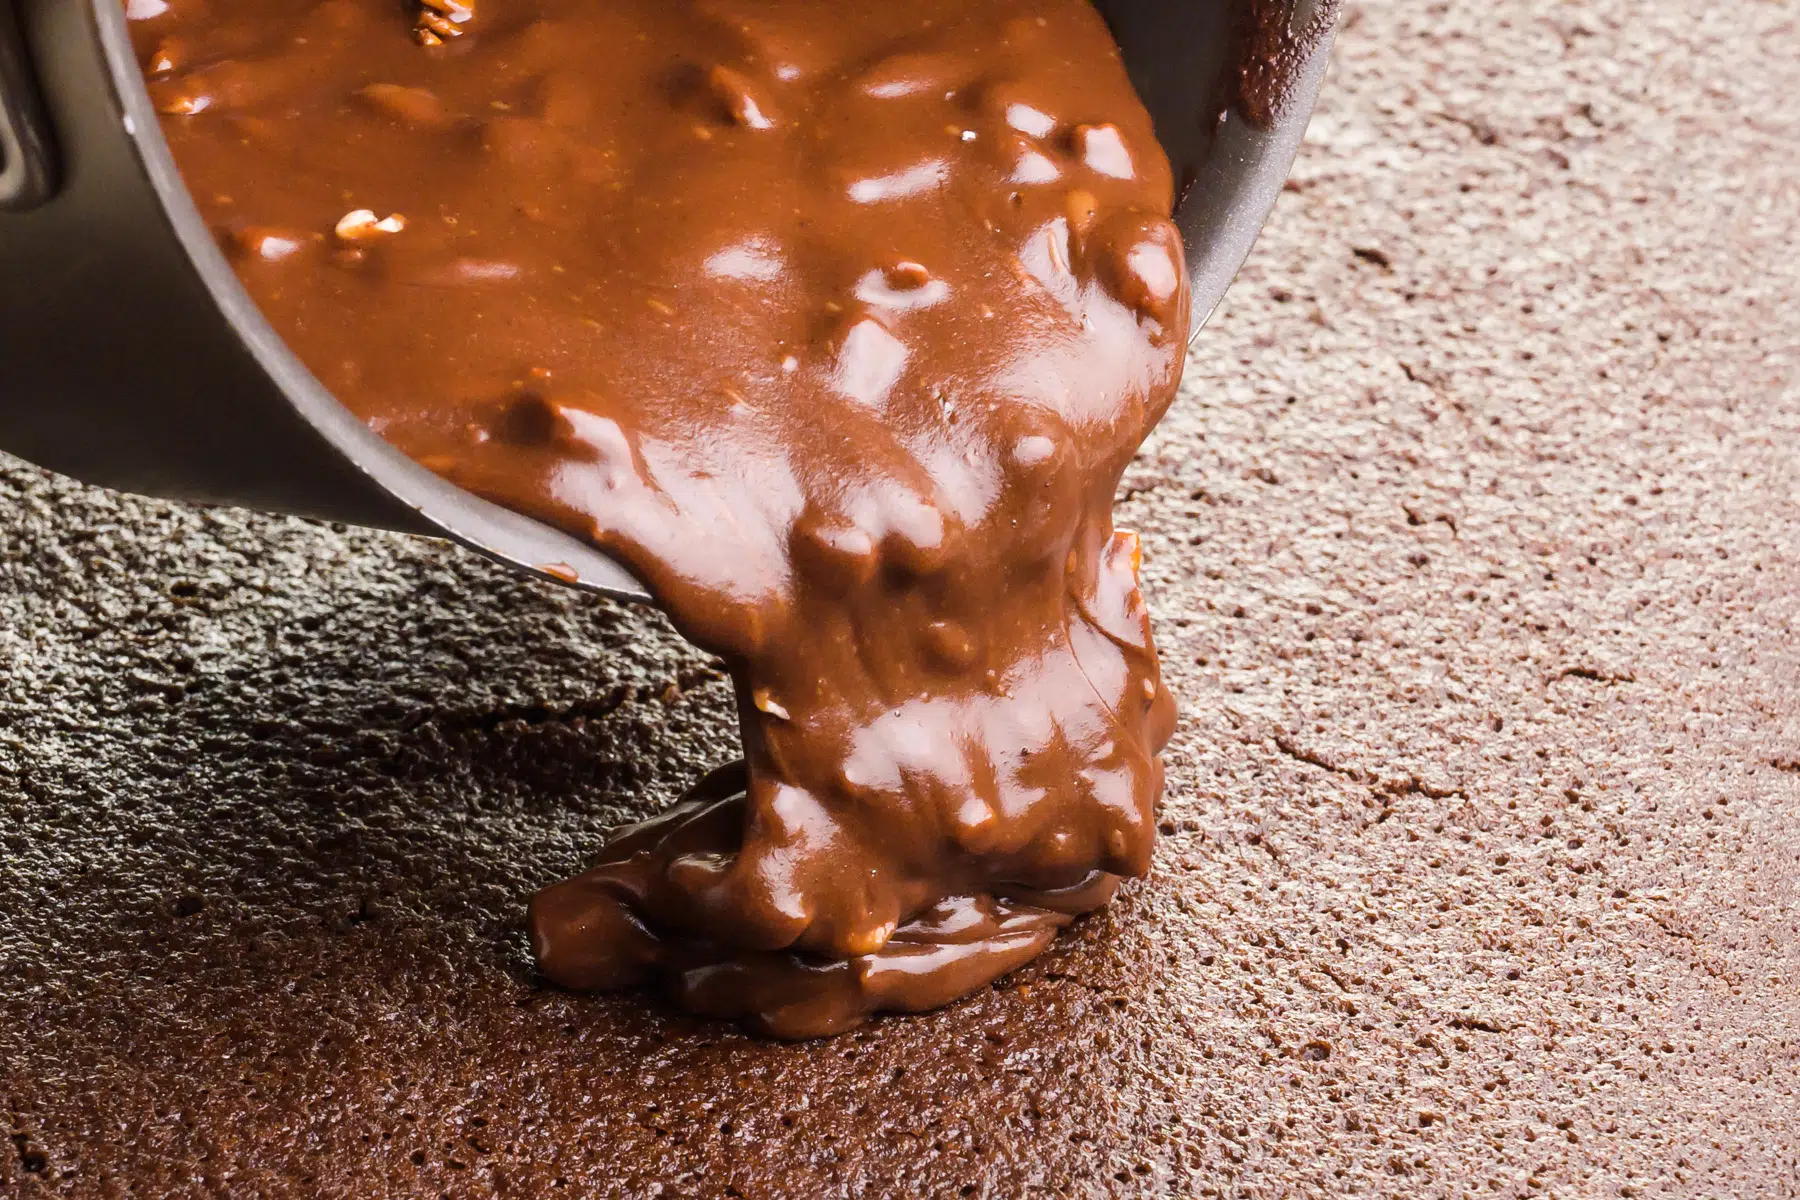 Chocolate frosting is being poured onto a freshly baked chocolate cake.